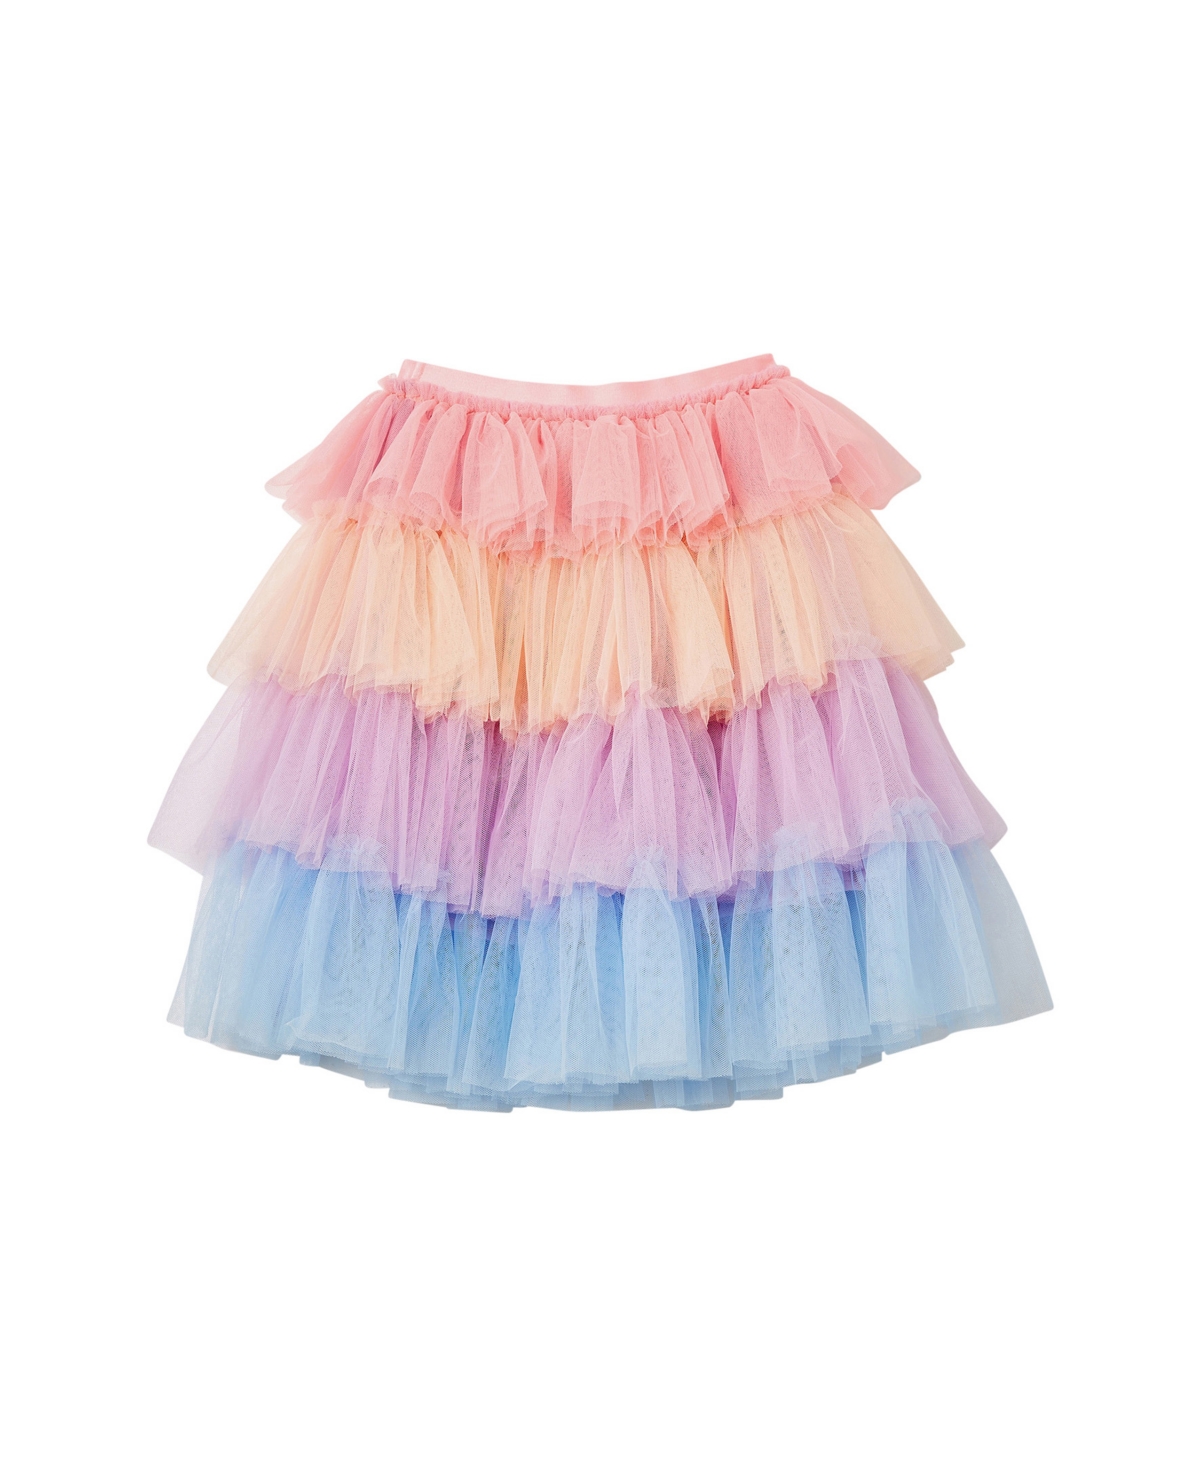 Cotton On Babies' Toddler Girls Trixiebelle Dress Up Skirt In Tropical Rainbow